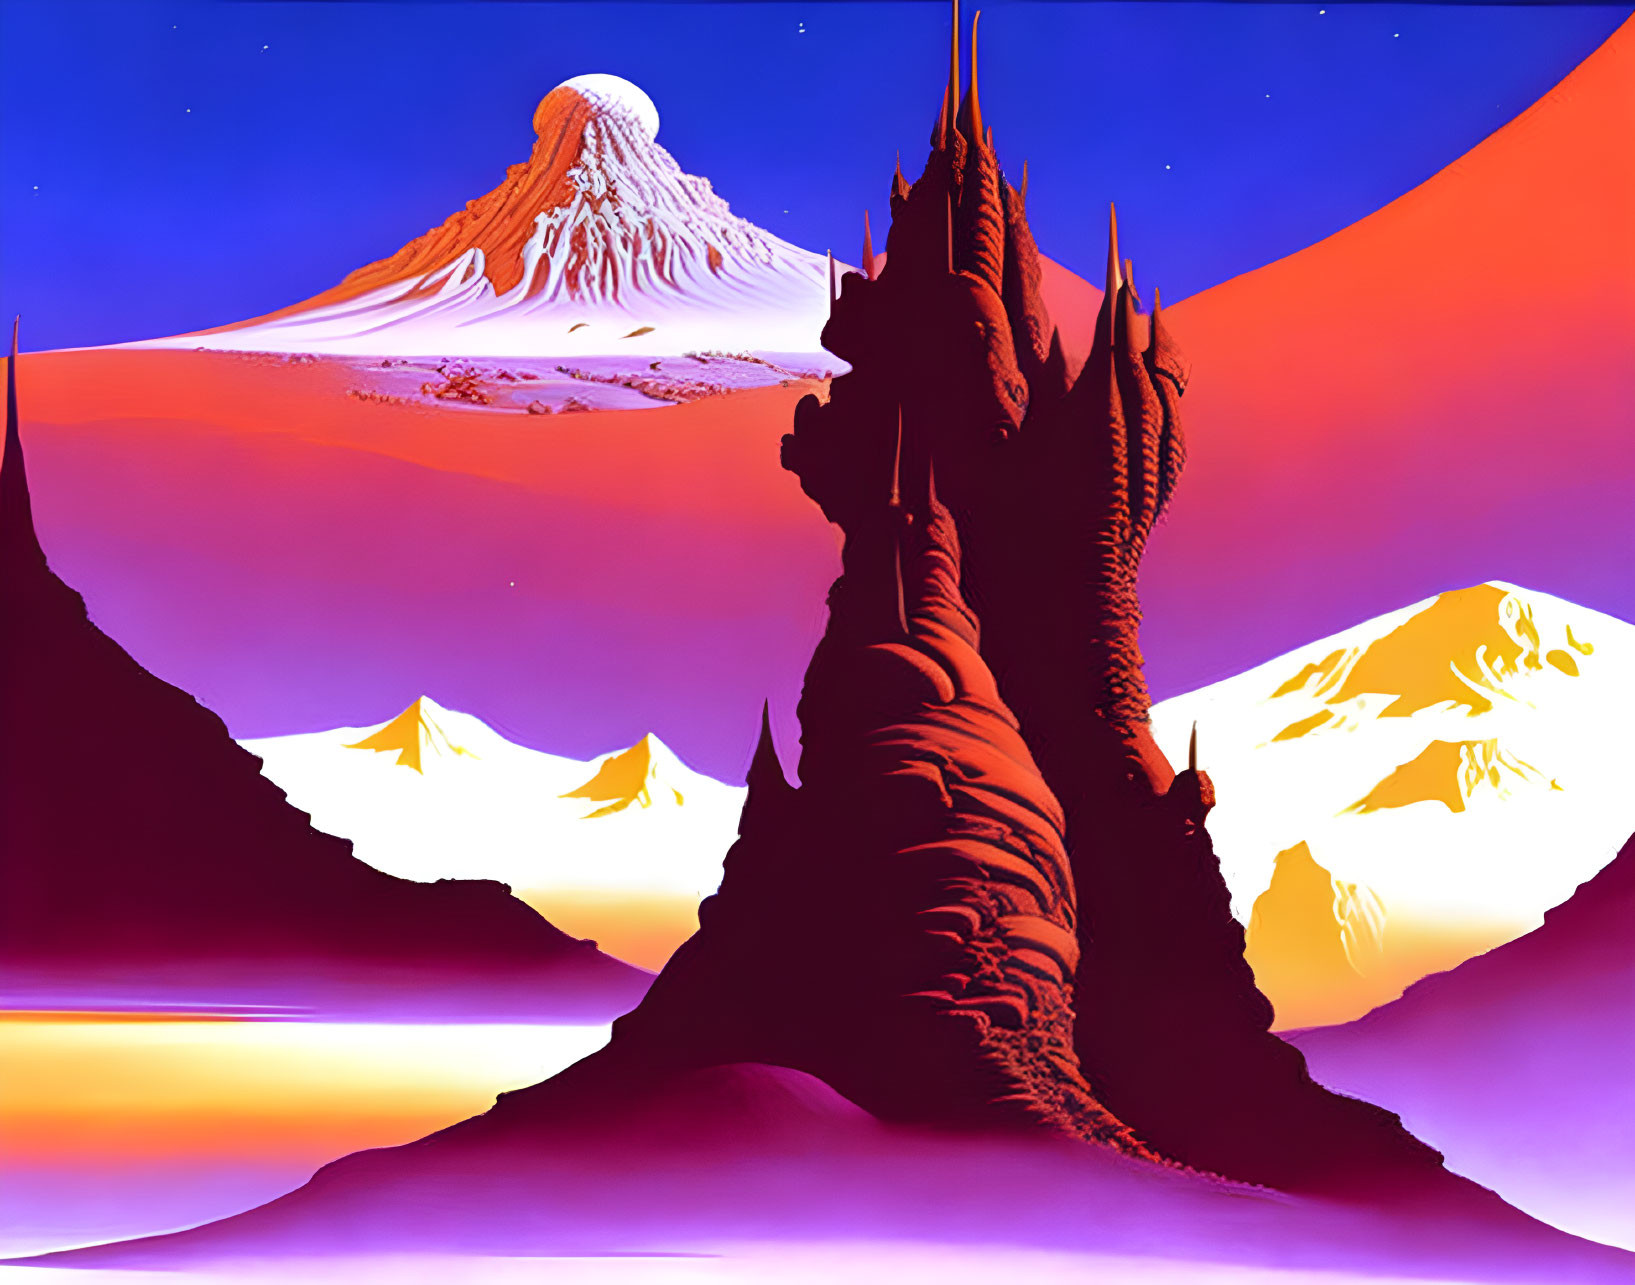 Sci-fi landscape with spire, mountains, and two-toned sky